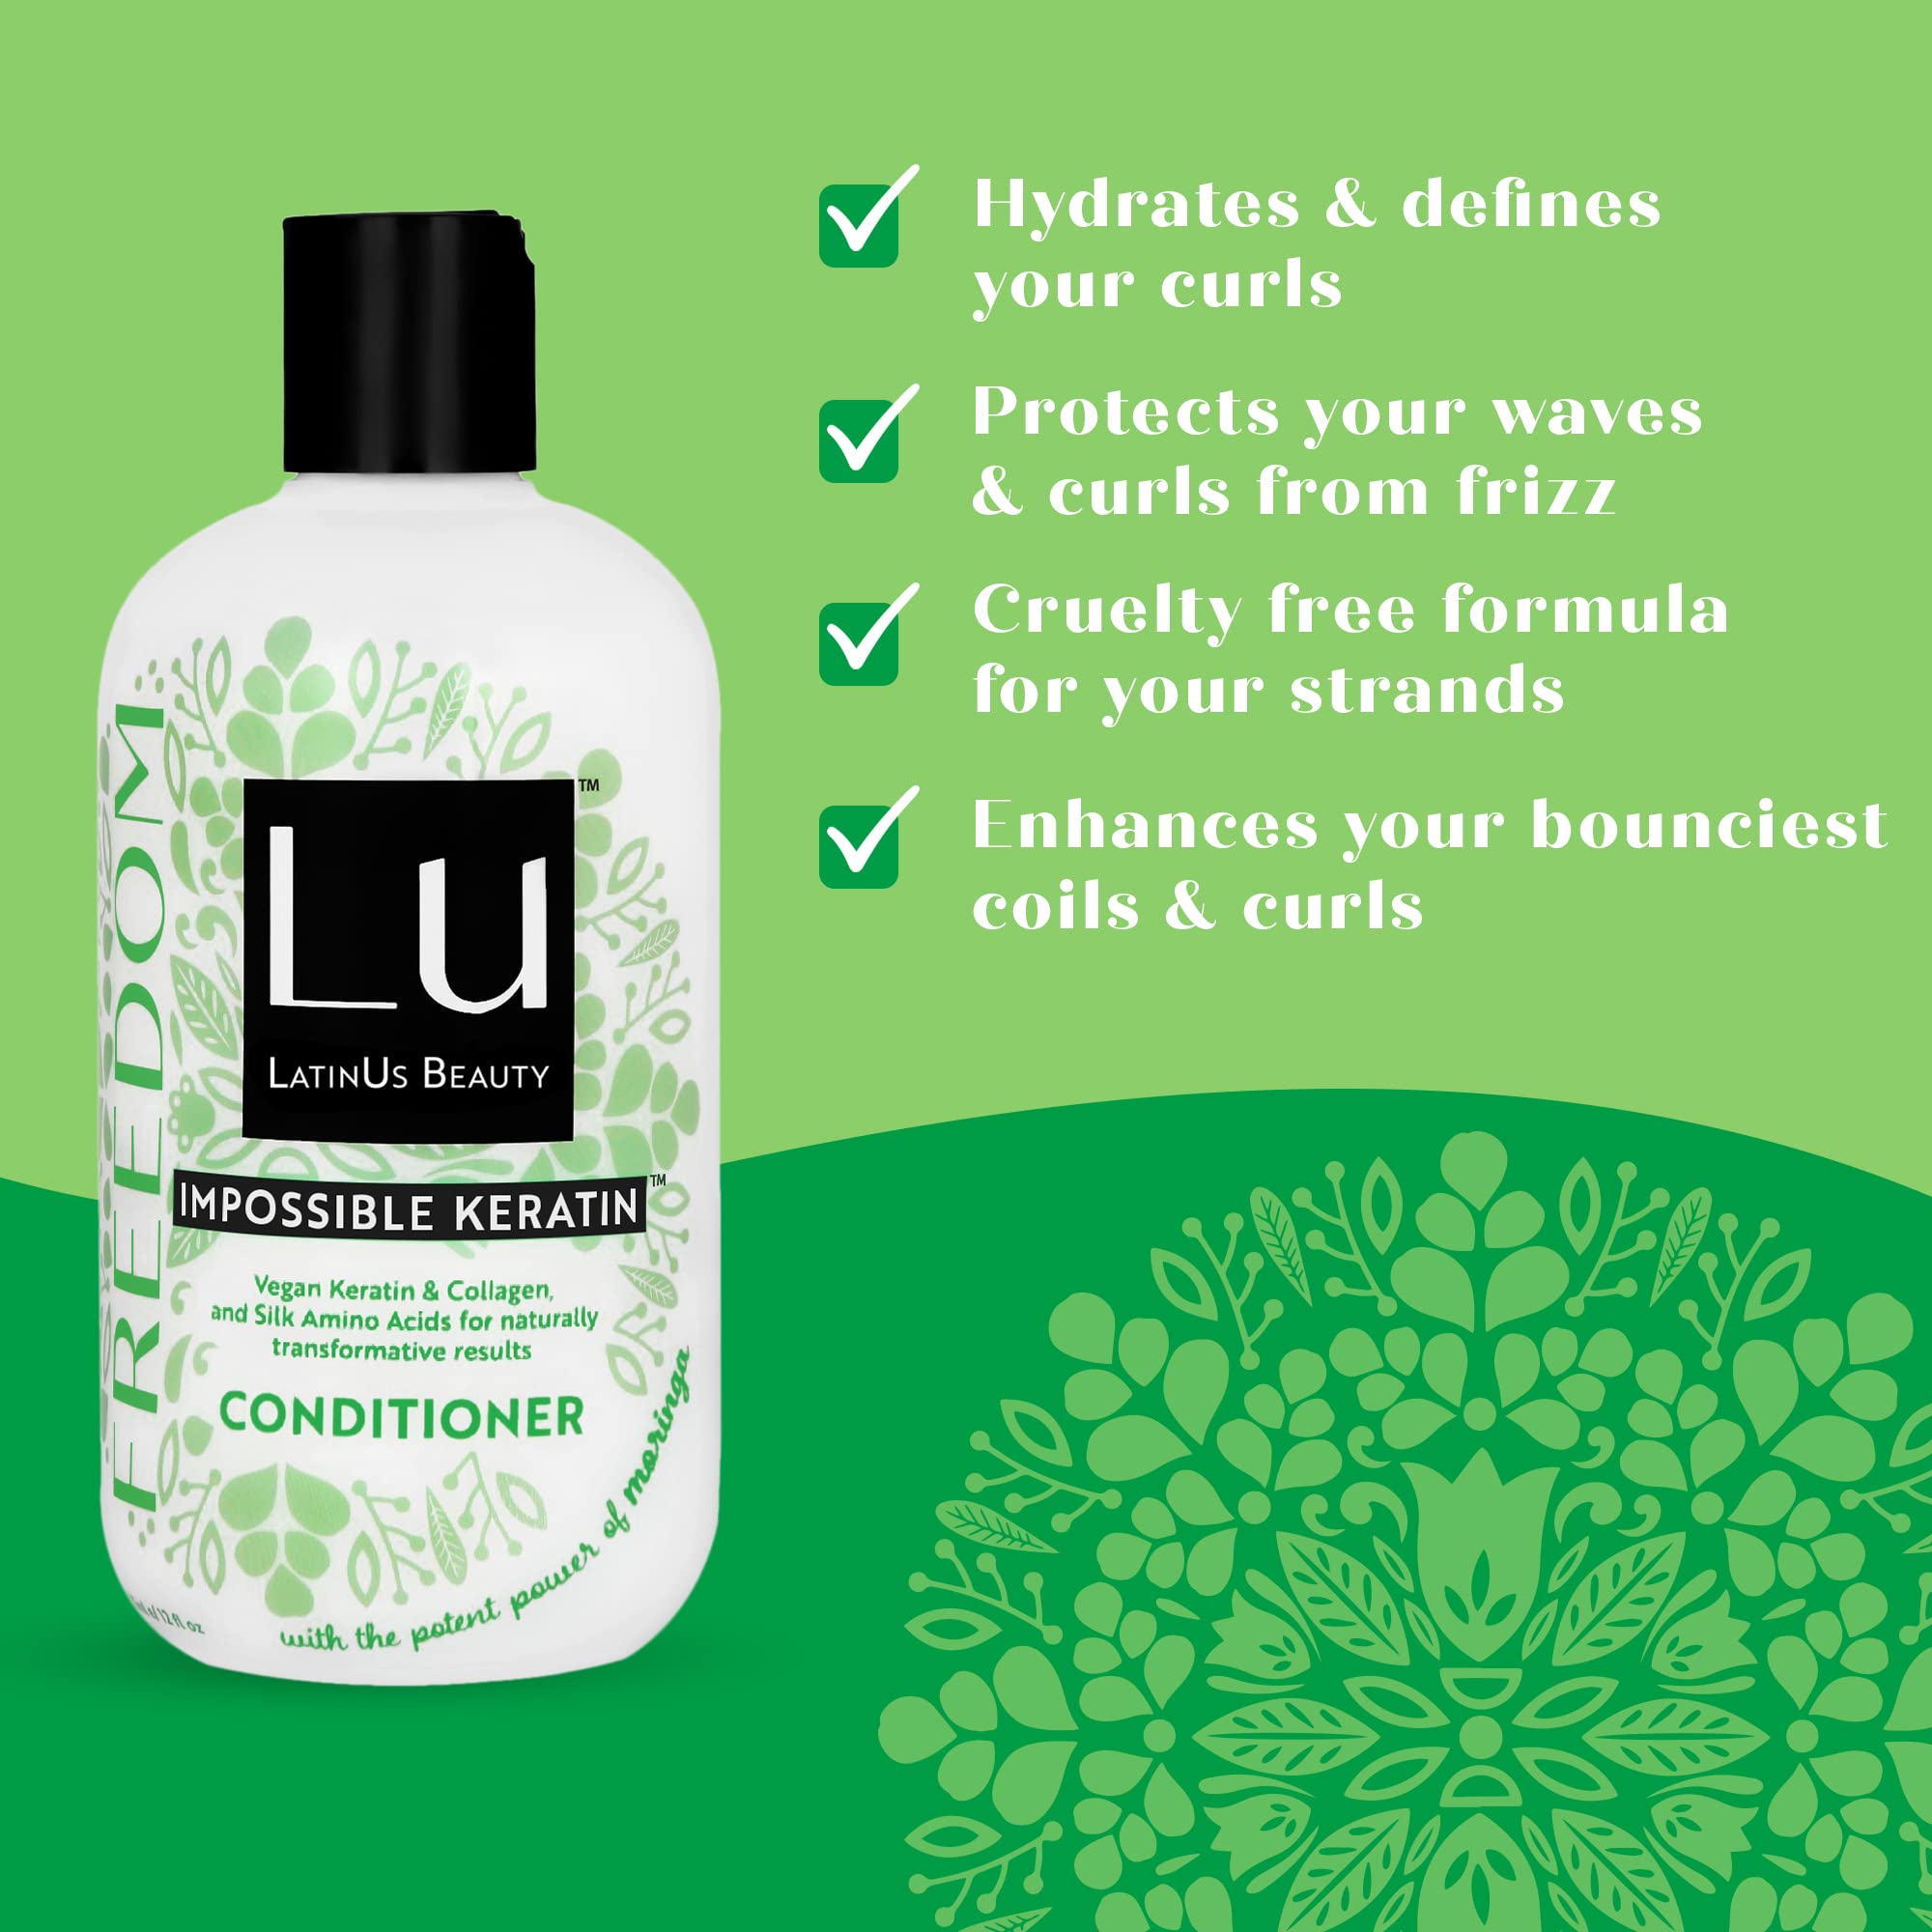 Lu LatinUs Beauty FREEDOM Full Volume Clean Conditioner with Antioxidant Moringa Seed Oil for Bouncy, Defined, Frizz Free, Shiny Curls (12oz)